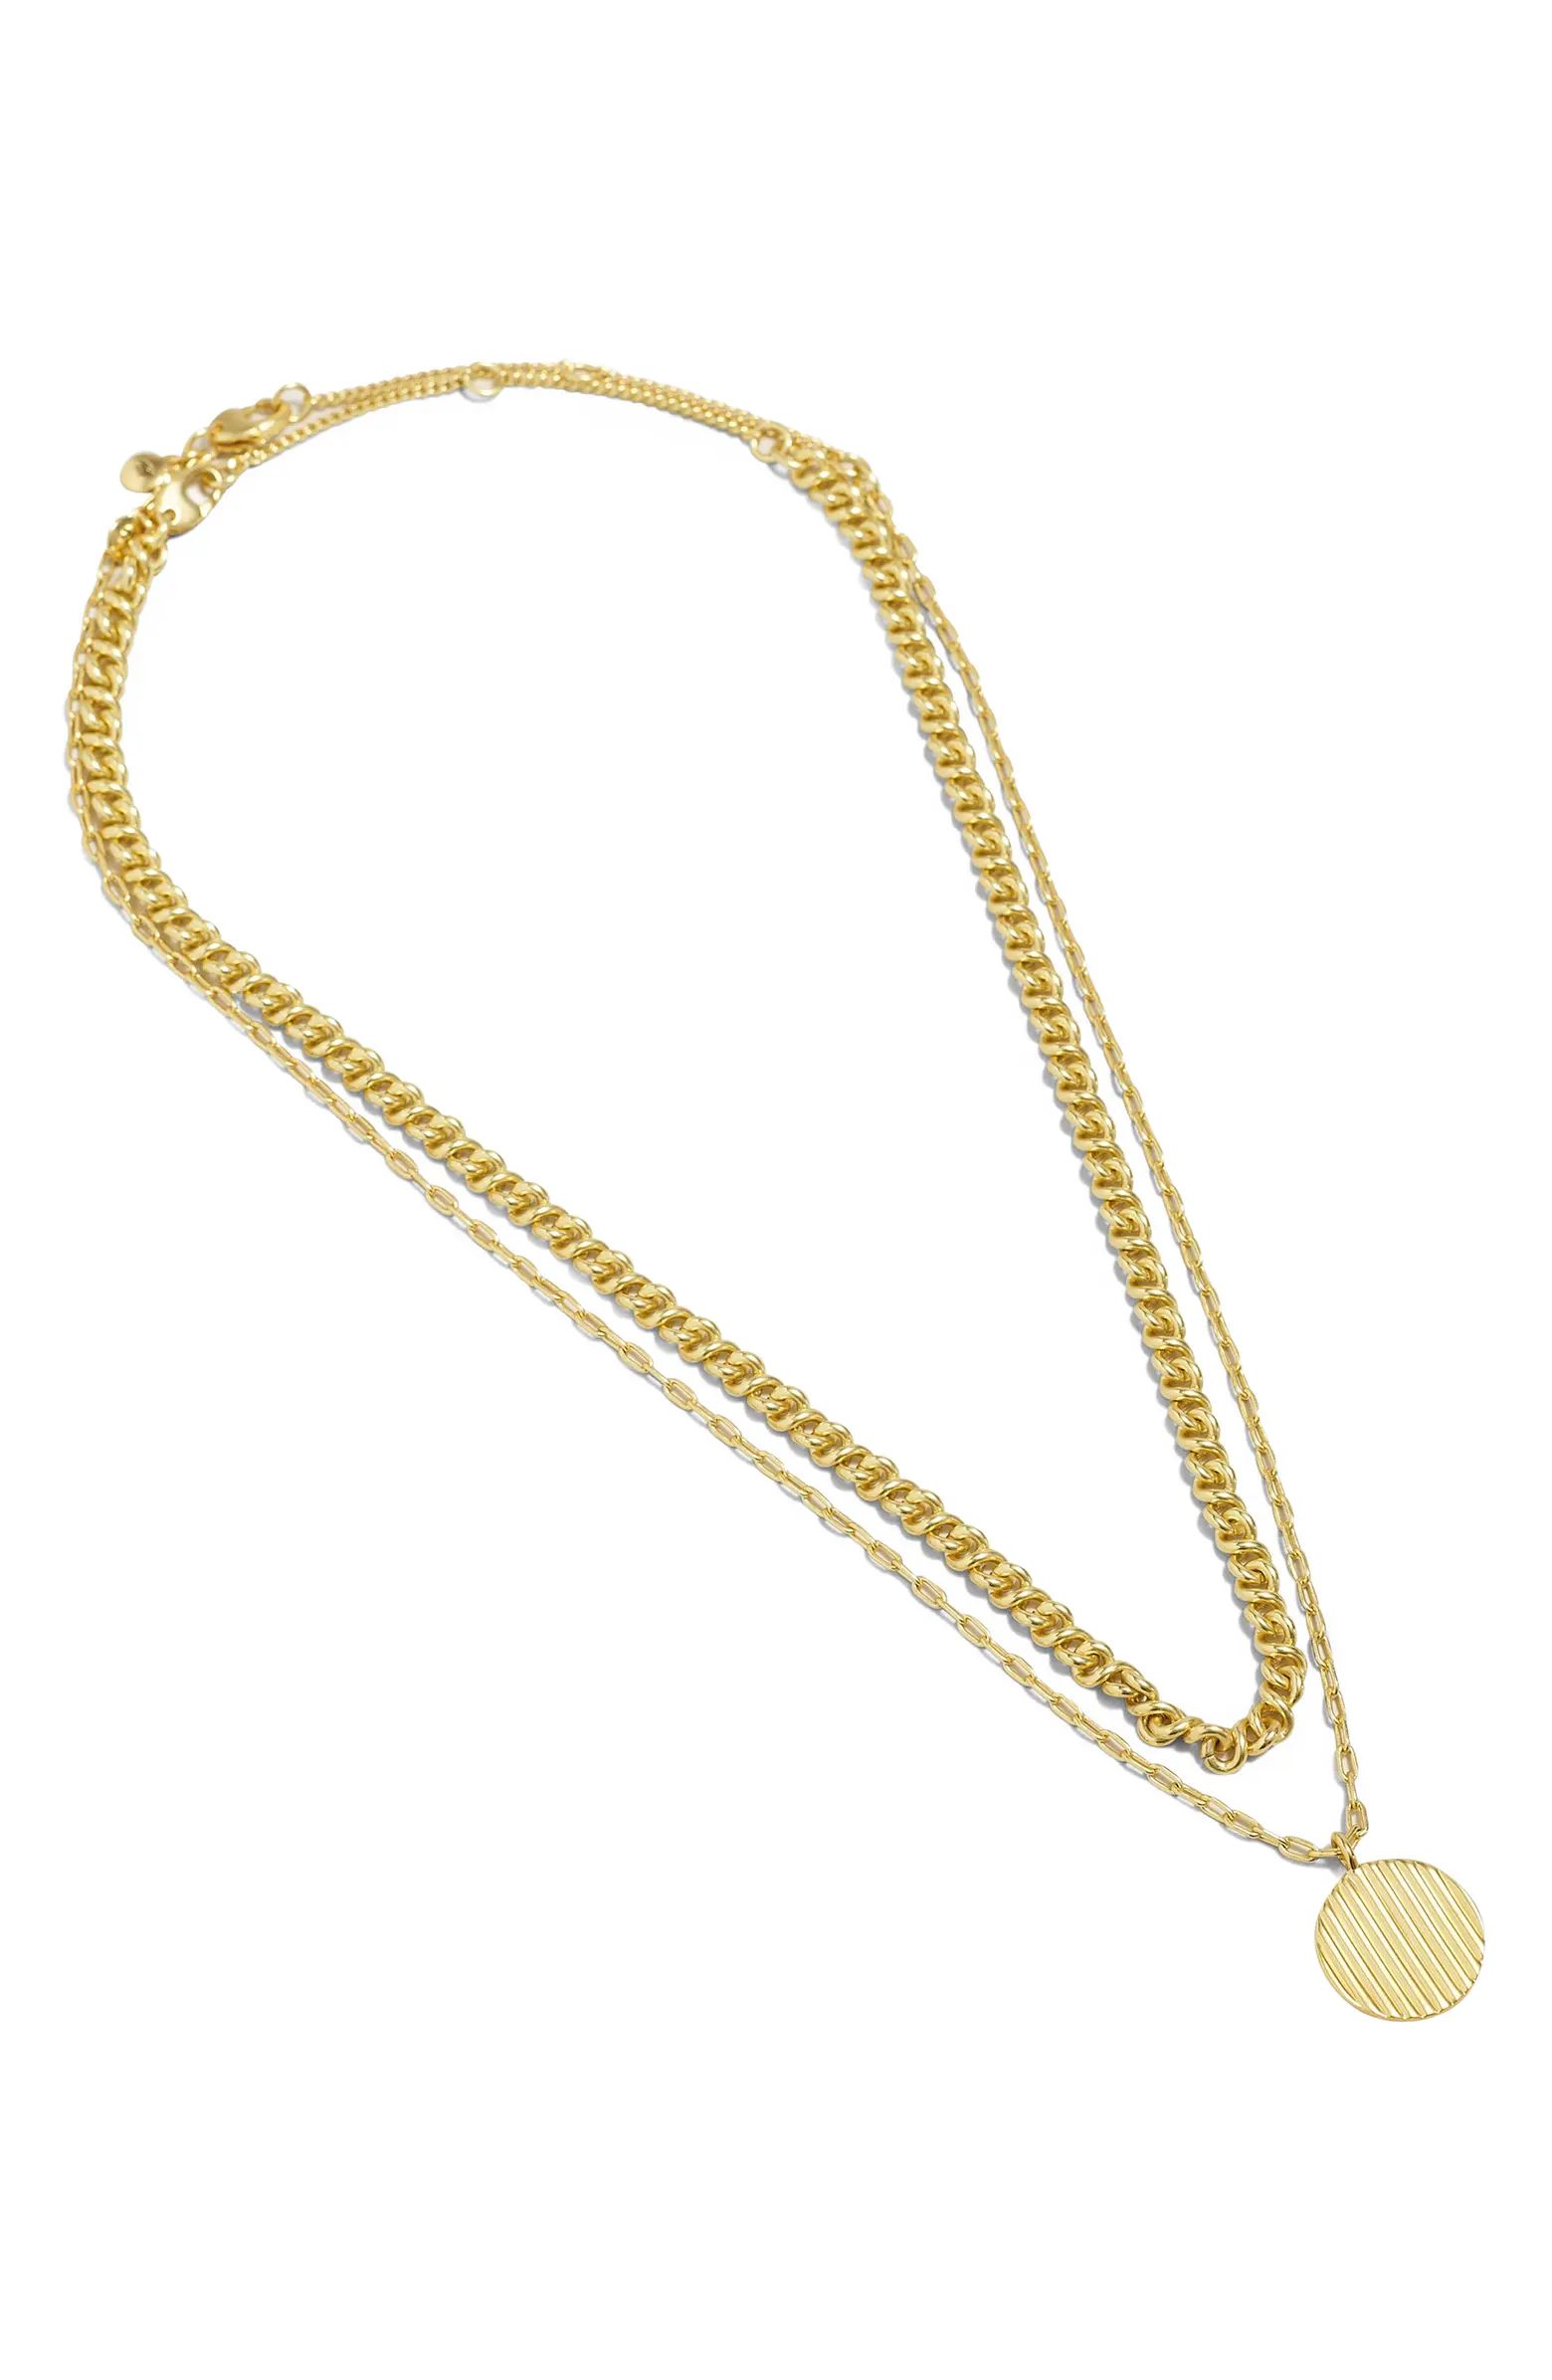 Set of 2 Twisted Chain & Pendant Necklaces | Nordstrom